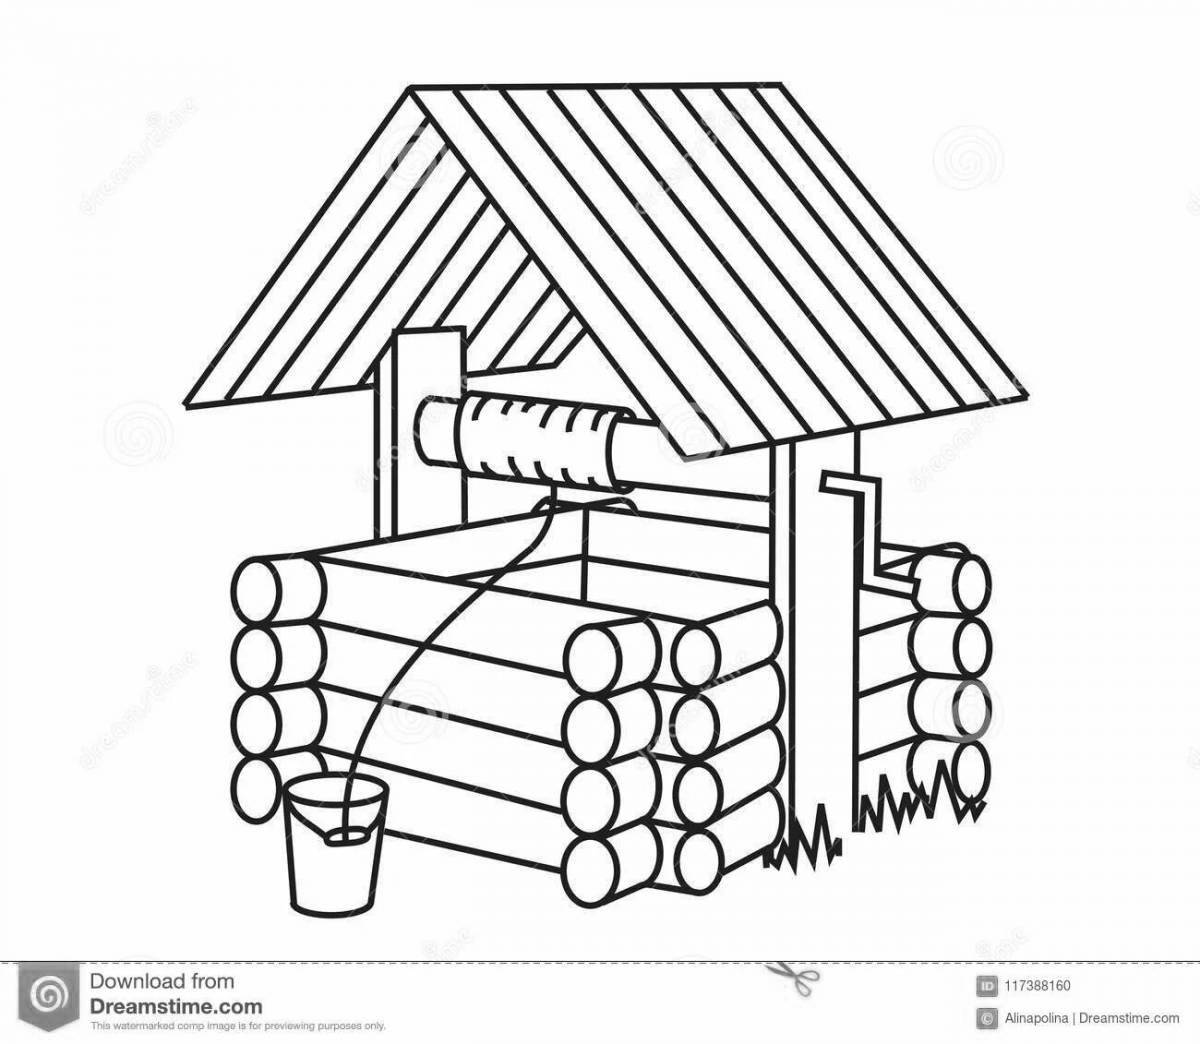 Fun coloring of a wooden house for babies